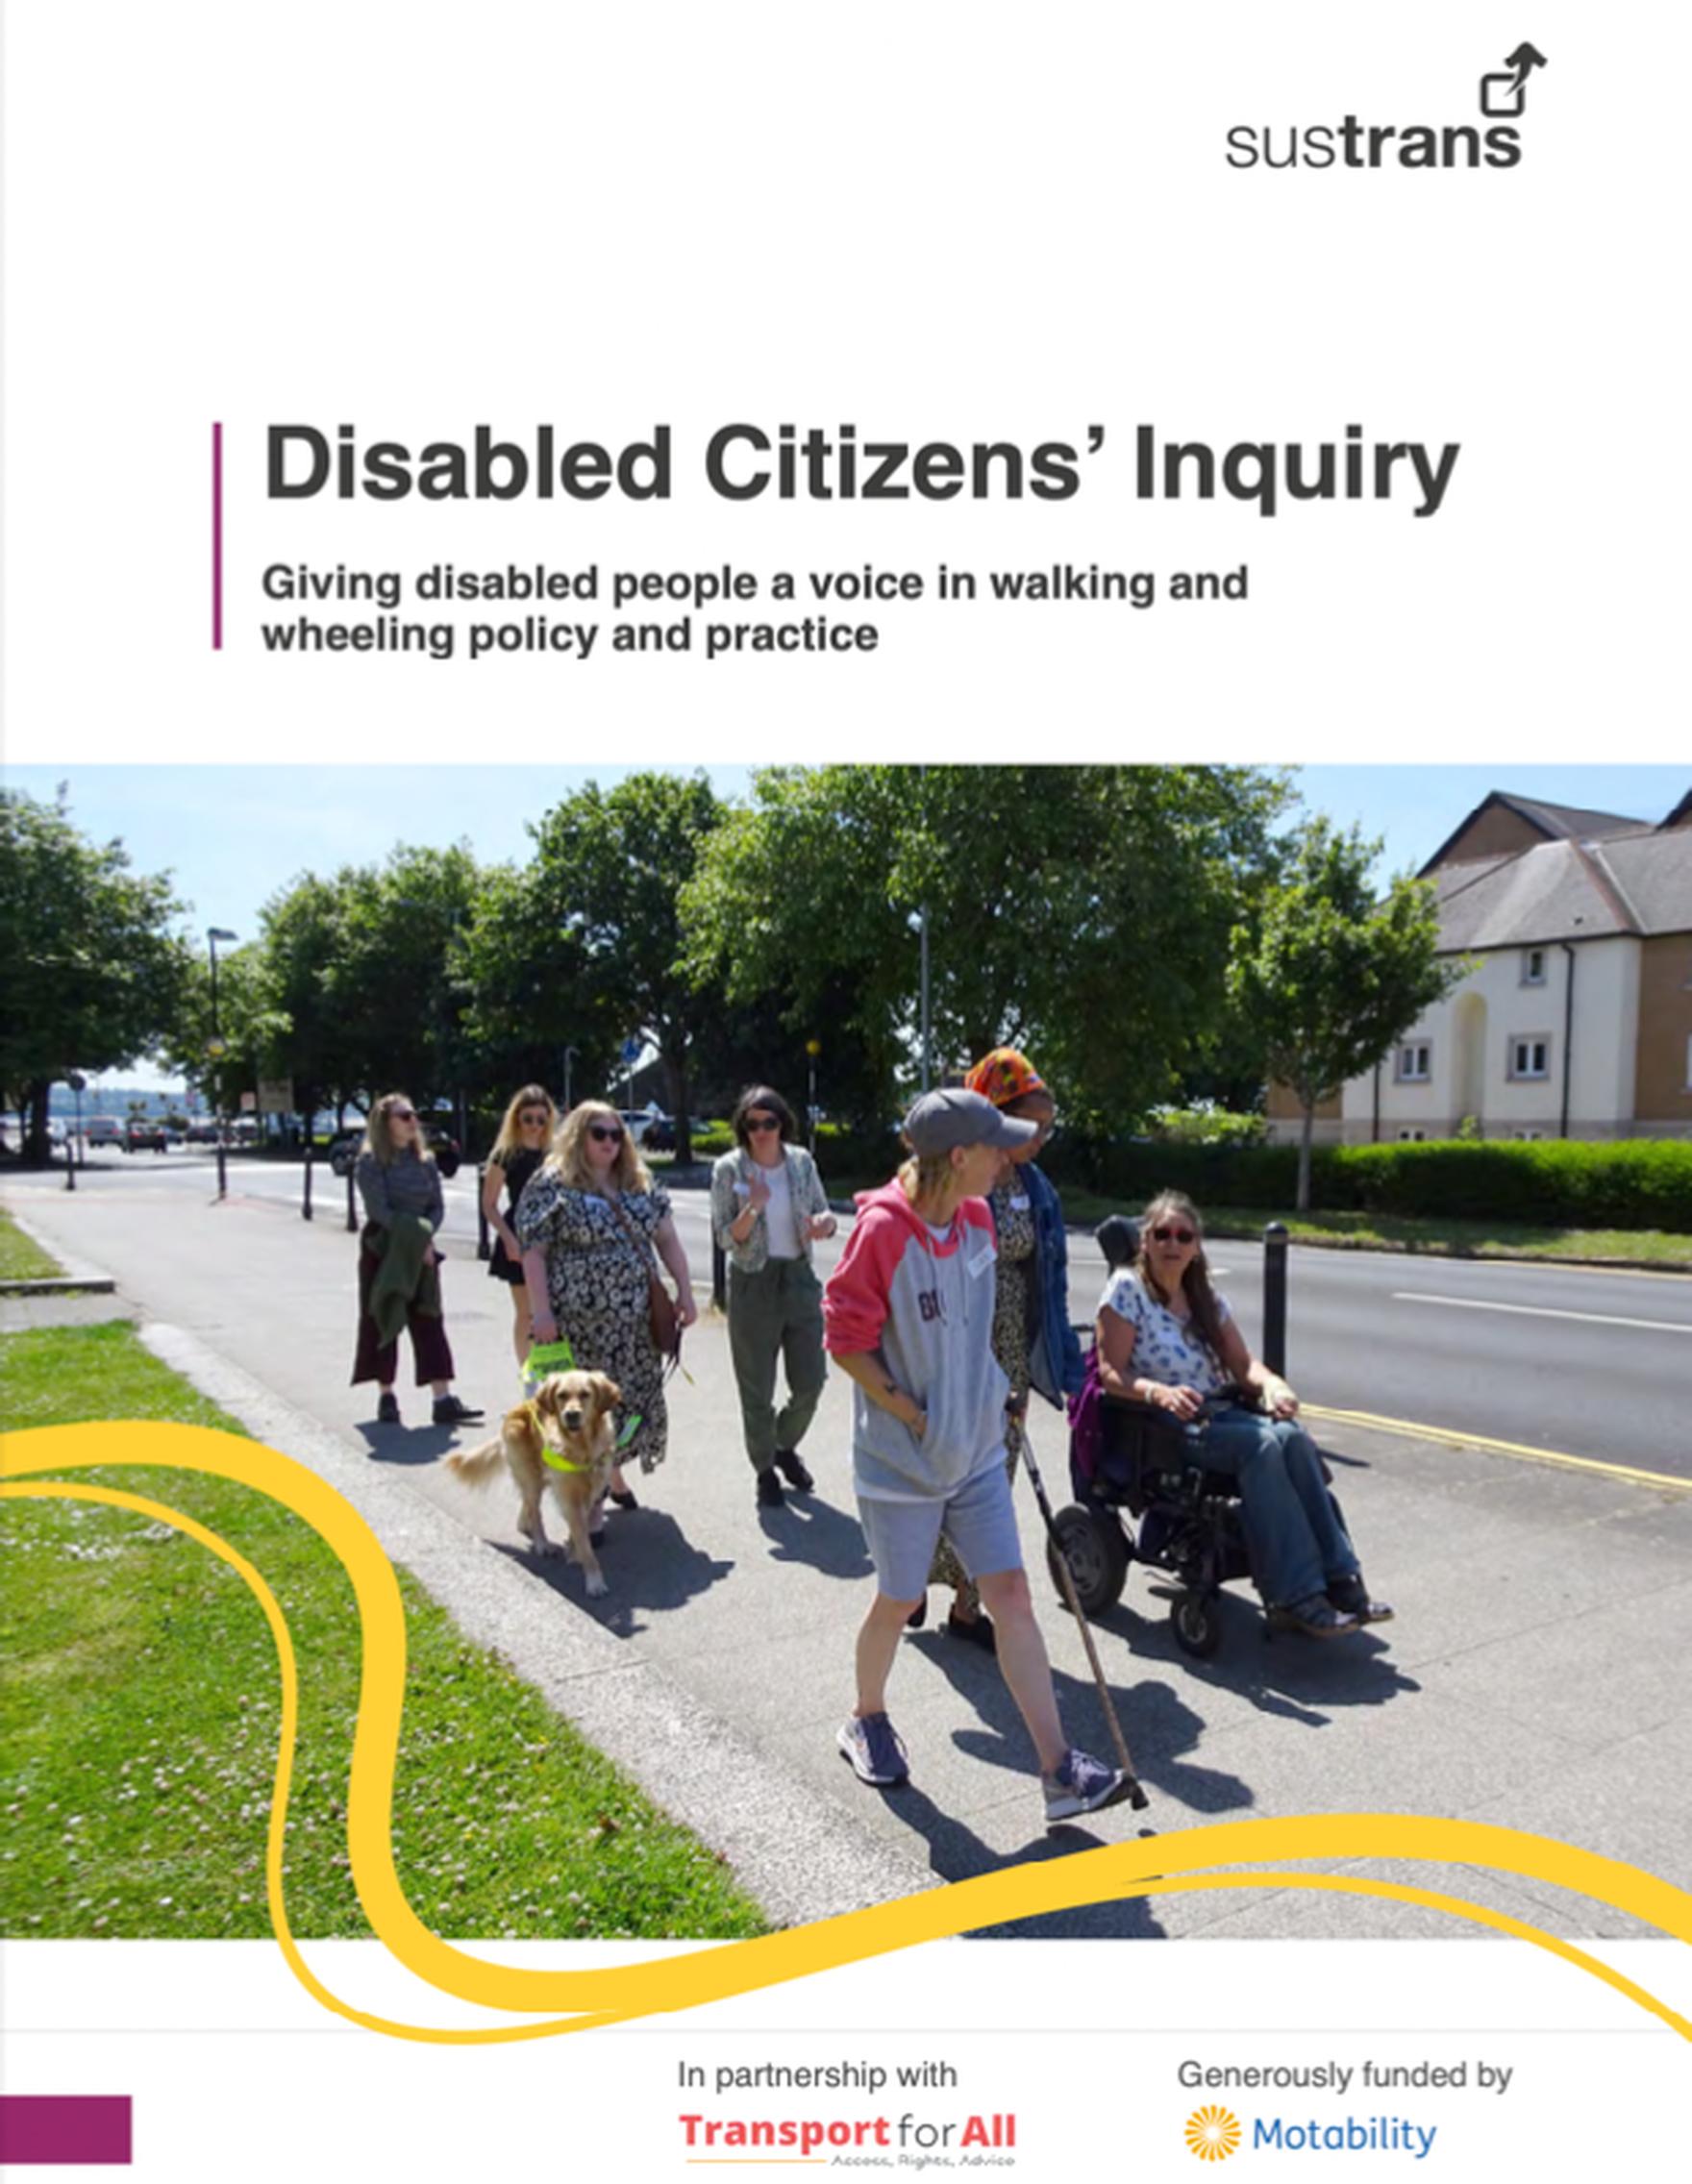 Measures needed to enable disabled people to access local streets, inquiry finds